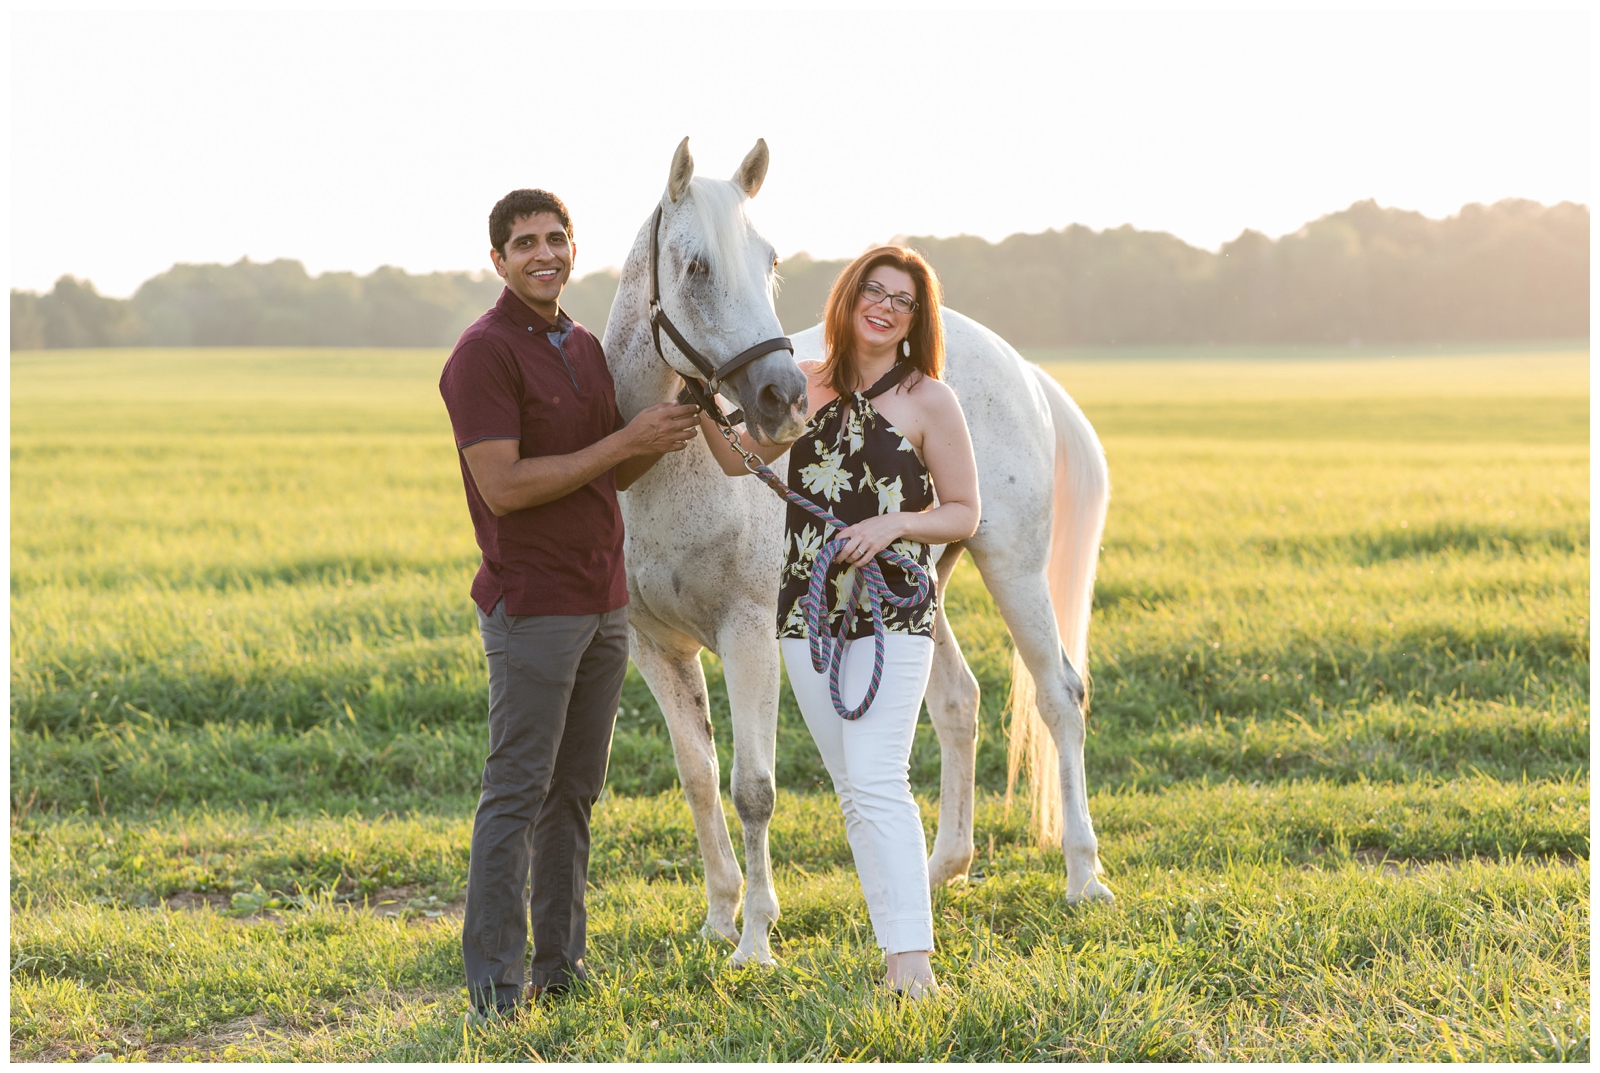 groom in red shirt and bride in floral top pose with white horse in Ohio field during engagement portraits